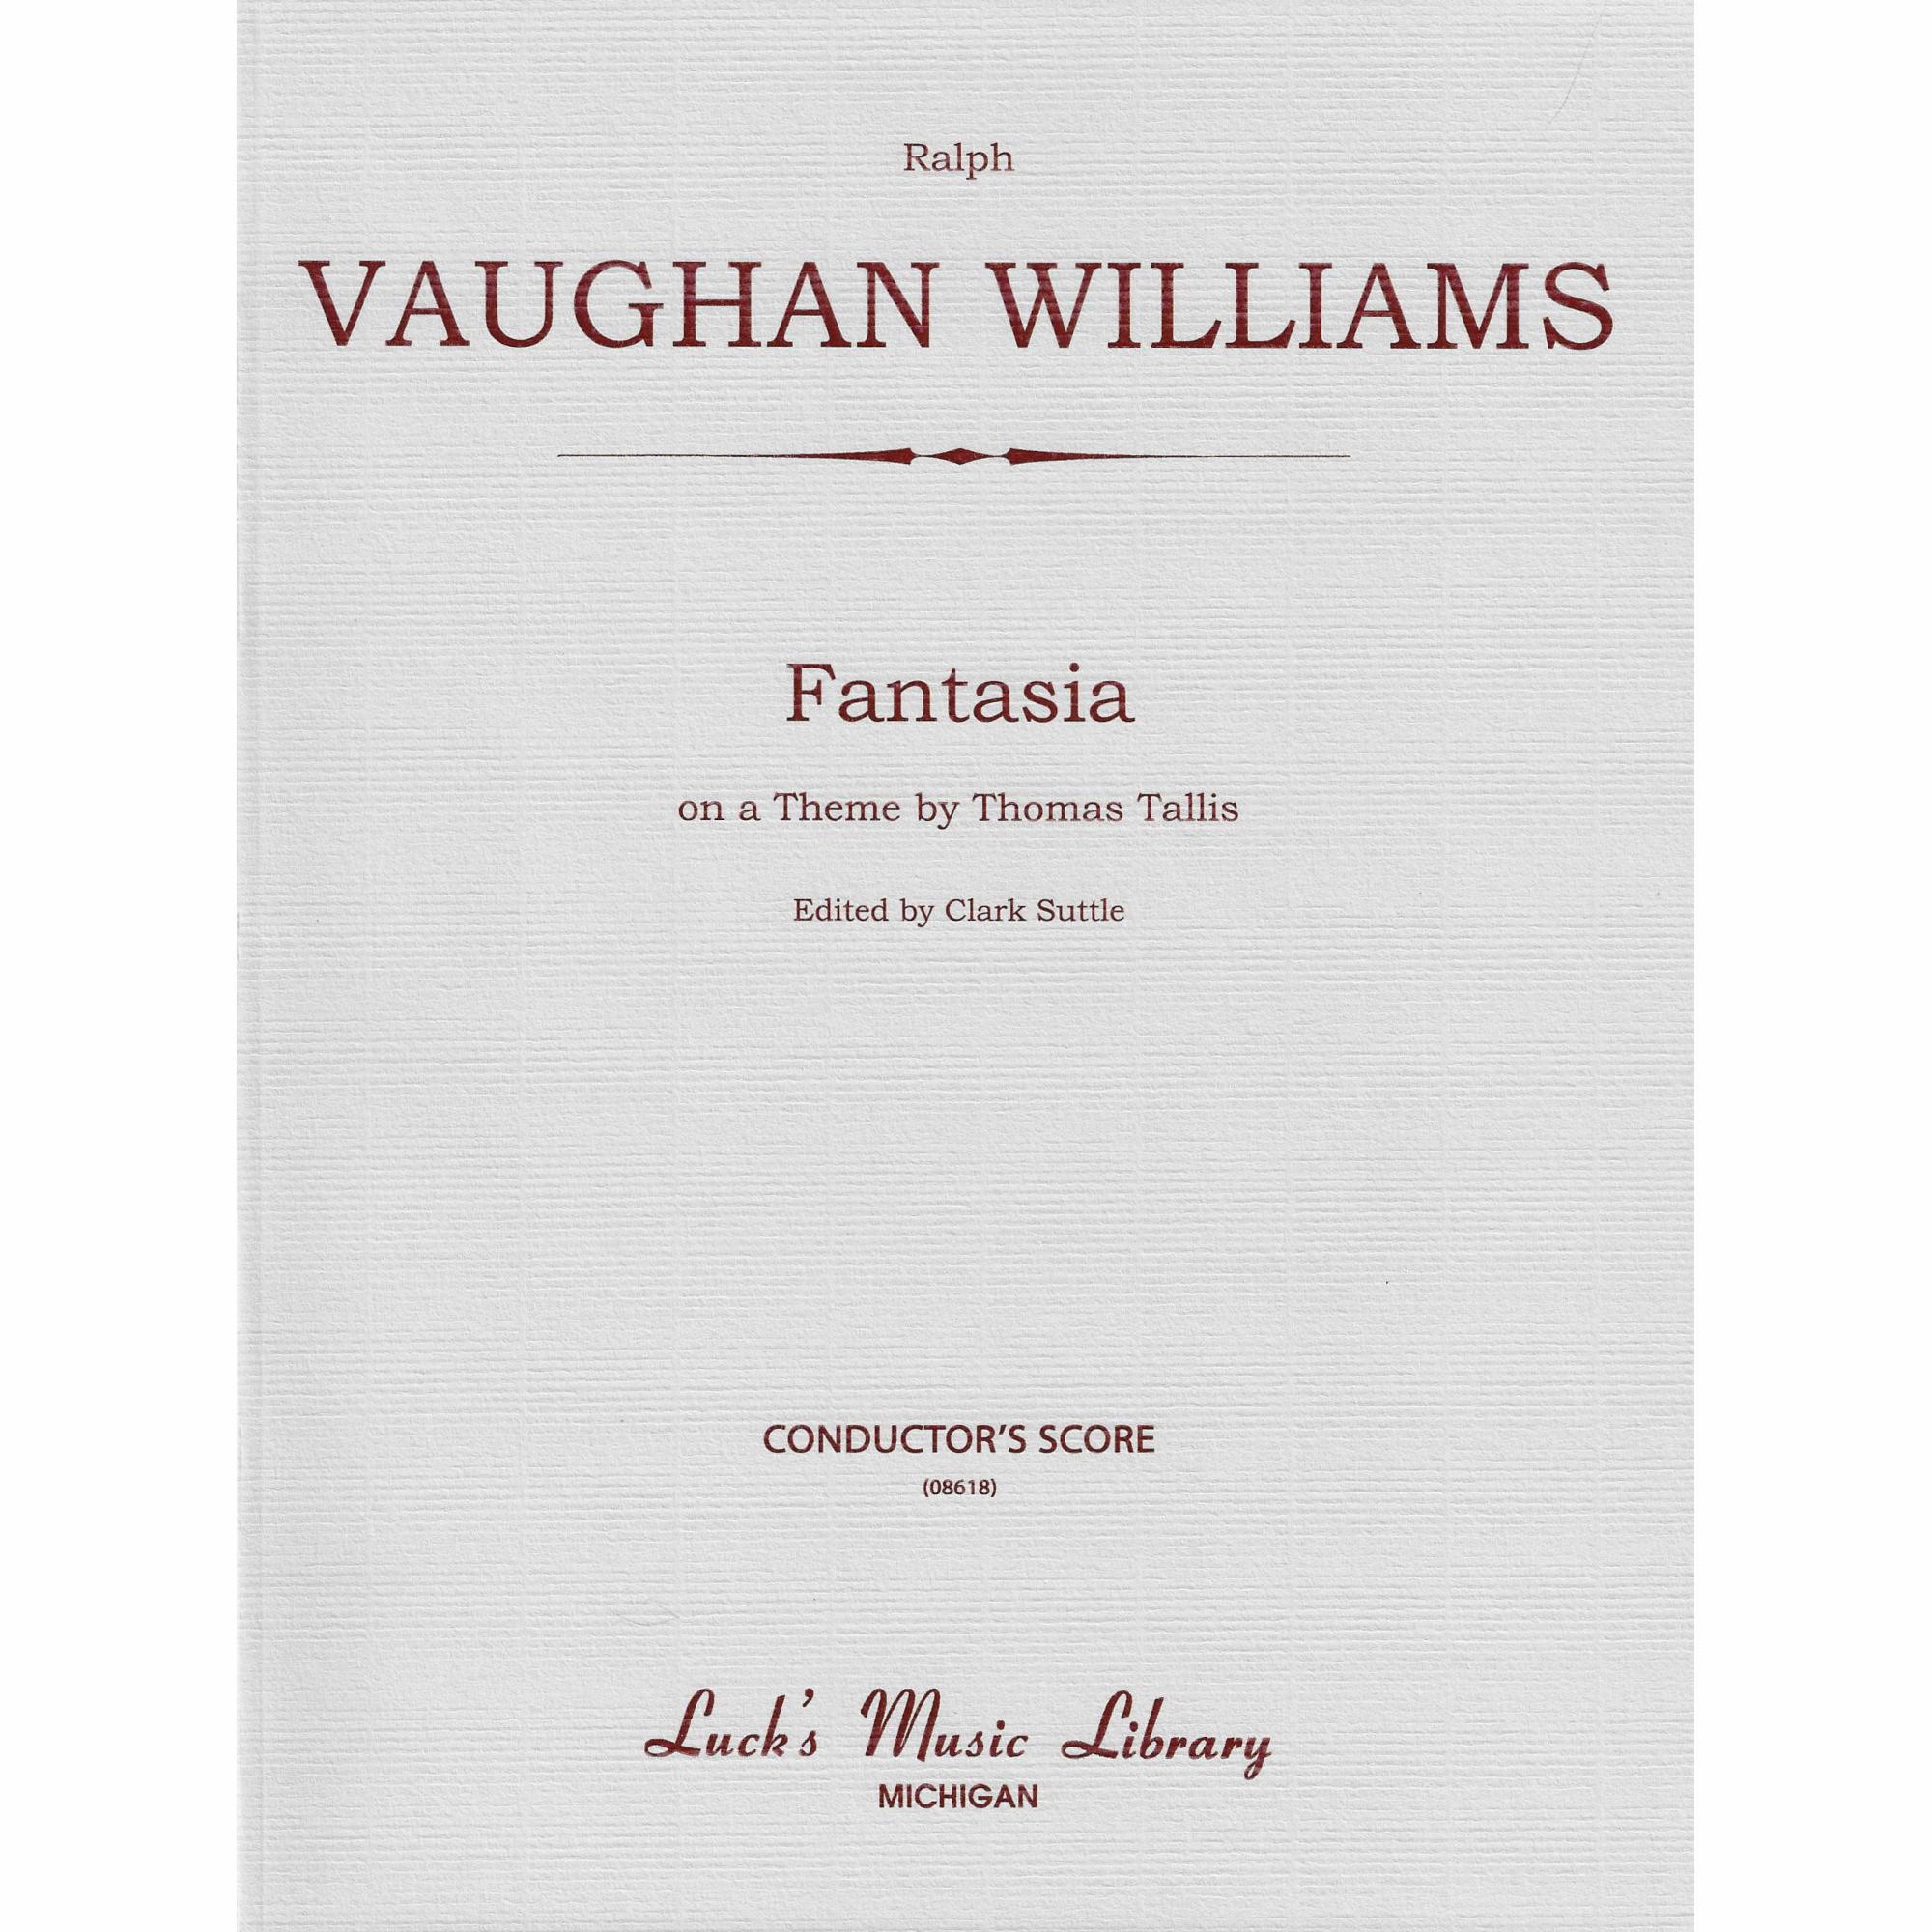 Vaughan Williams -- Fantasia on a Theme by Thomas Tallis for String Orchestra